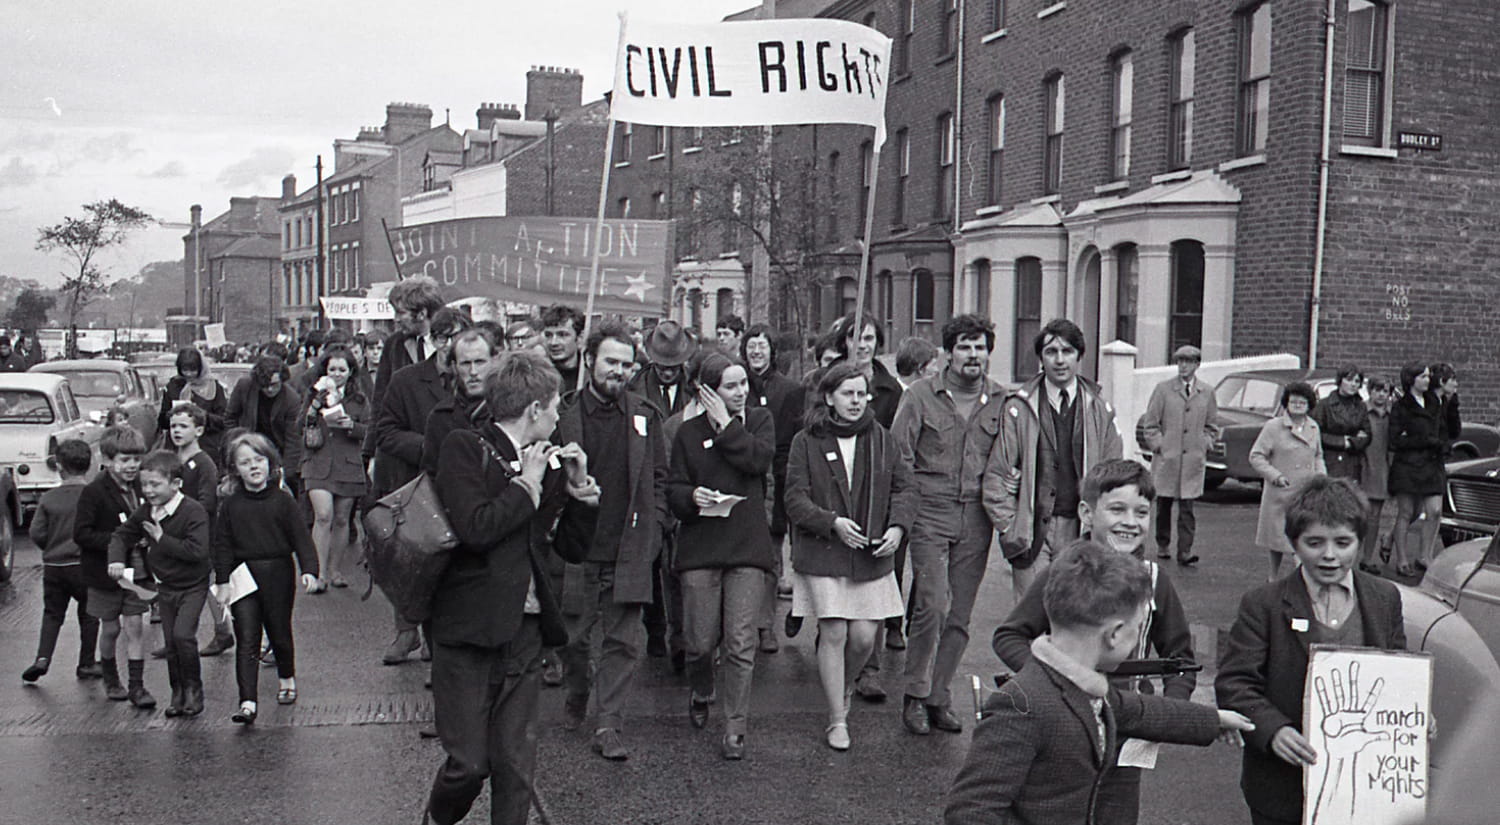 Kevin Boyle (with goatee beard) leads an early civil rights march, Belfast, October 1968.